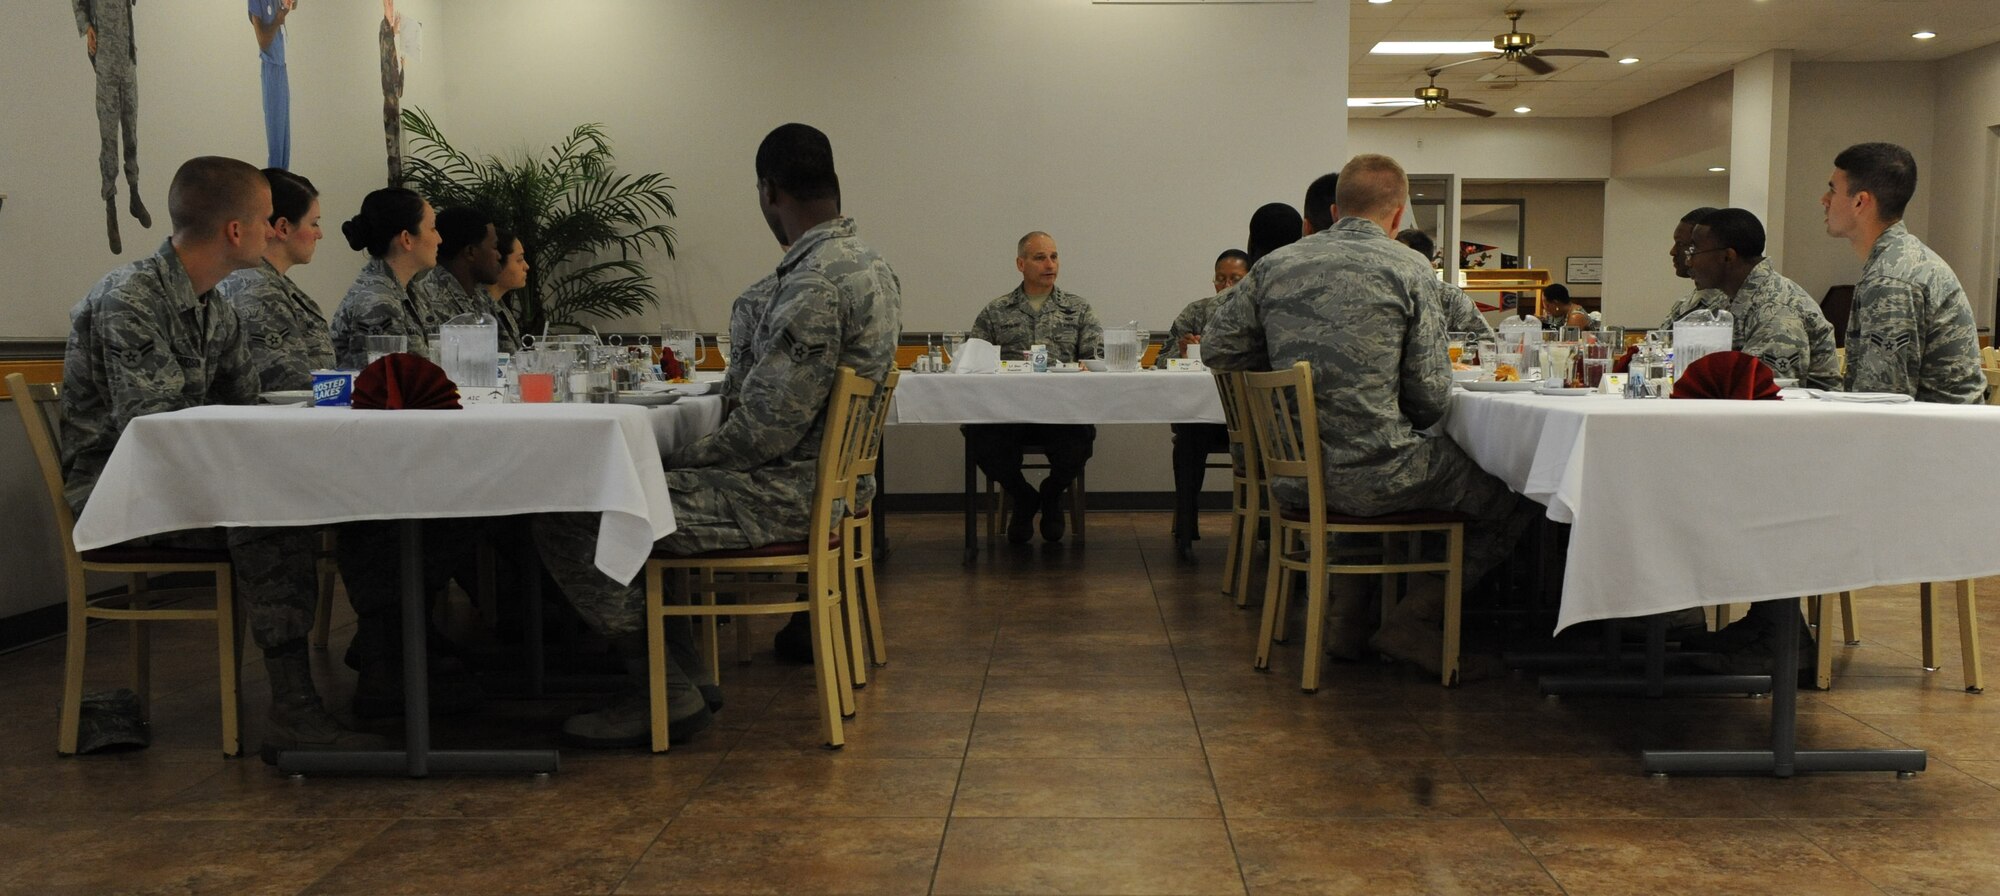 Lt. Gen. James Kowalski, Air Force Global Strike Command commander, leads a breakfast discussion with Barksdale Airmen at the Red River Dining Facility at Barksdale Air Force Base, La., May 19. Topics of discussion included Global Strike Command's involvement in recent base events and how Barksdale Airmen help to accomplish the greater Global Strike Command mission. (U.S. Air Force photo/Airman 1st Class Micaiah Anthony)(RELEASED)